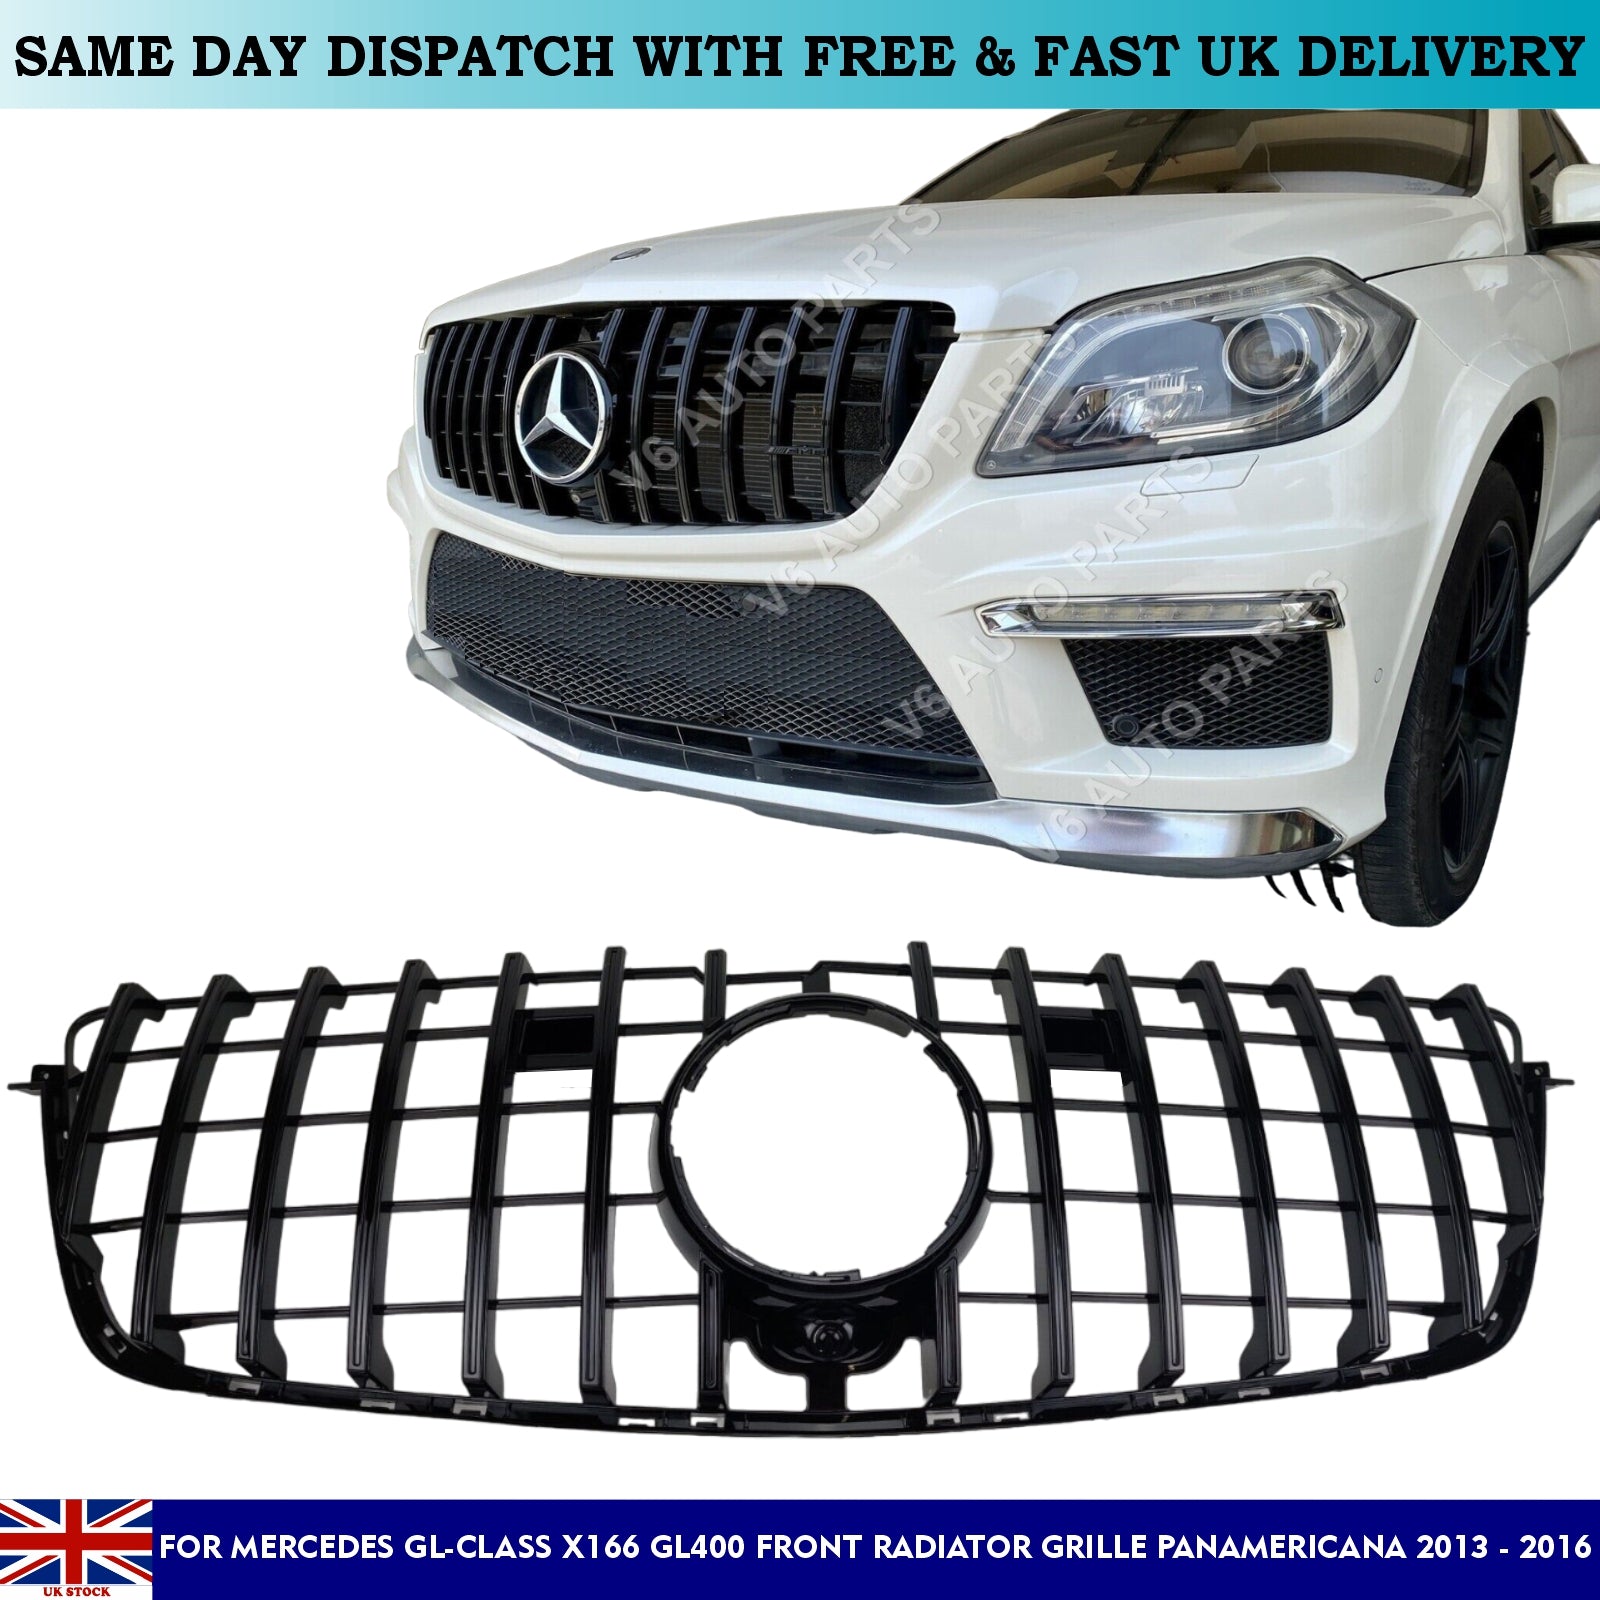 For Mercedes GL-Class X166 GL500 Front Radiator Grille Panamericana 2013 - 2016